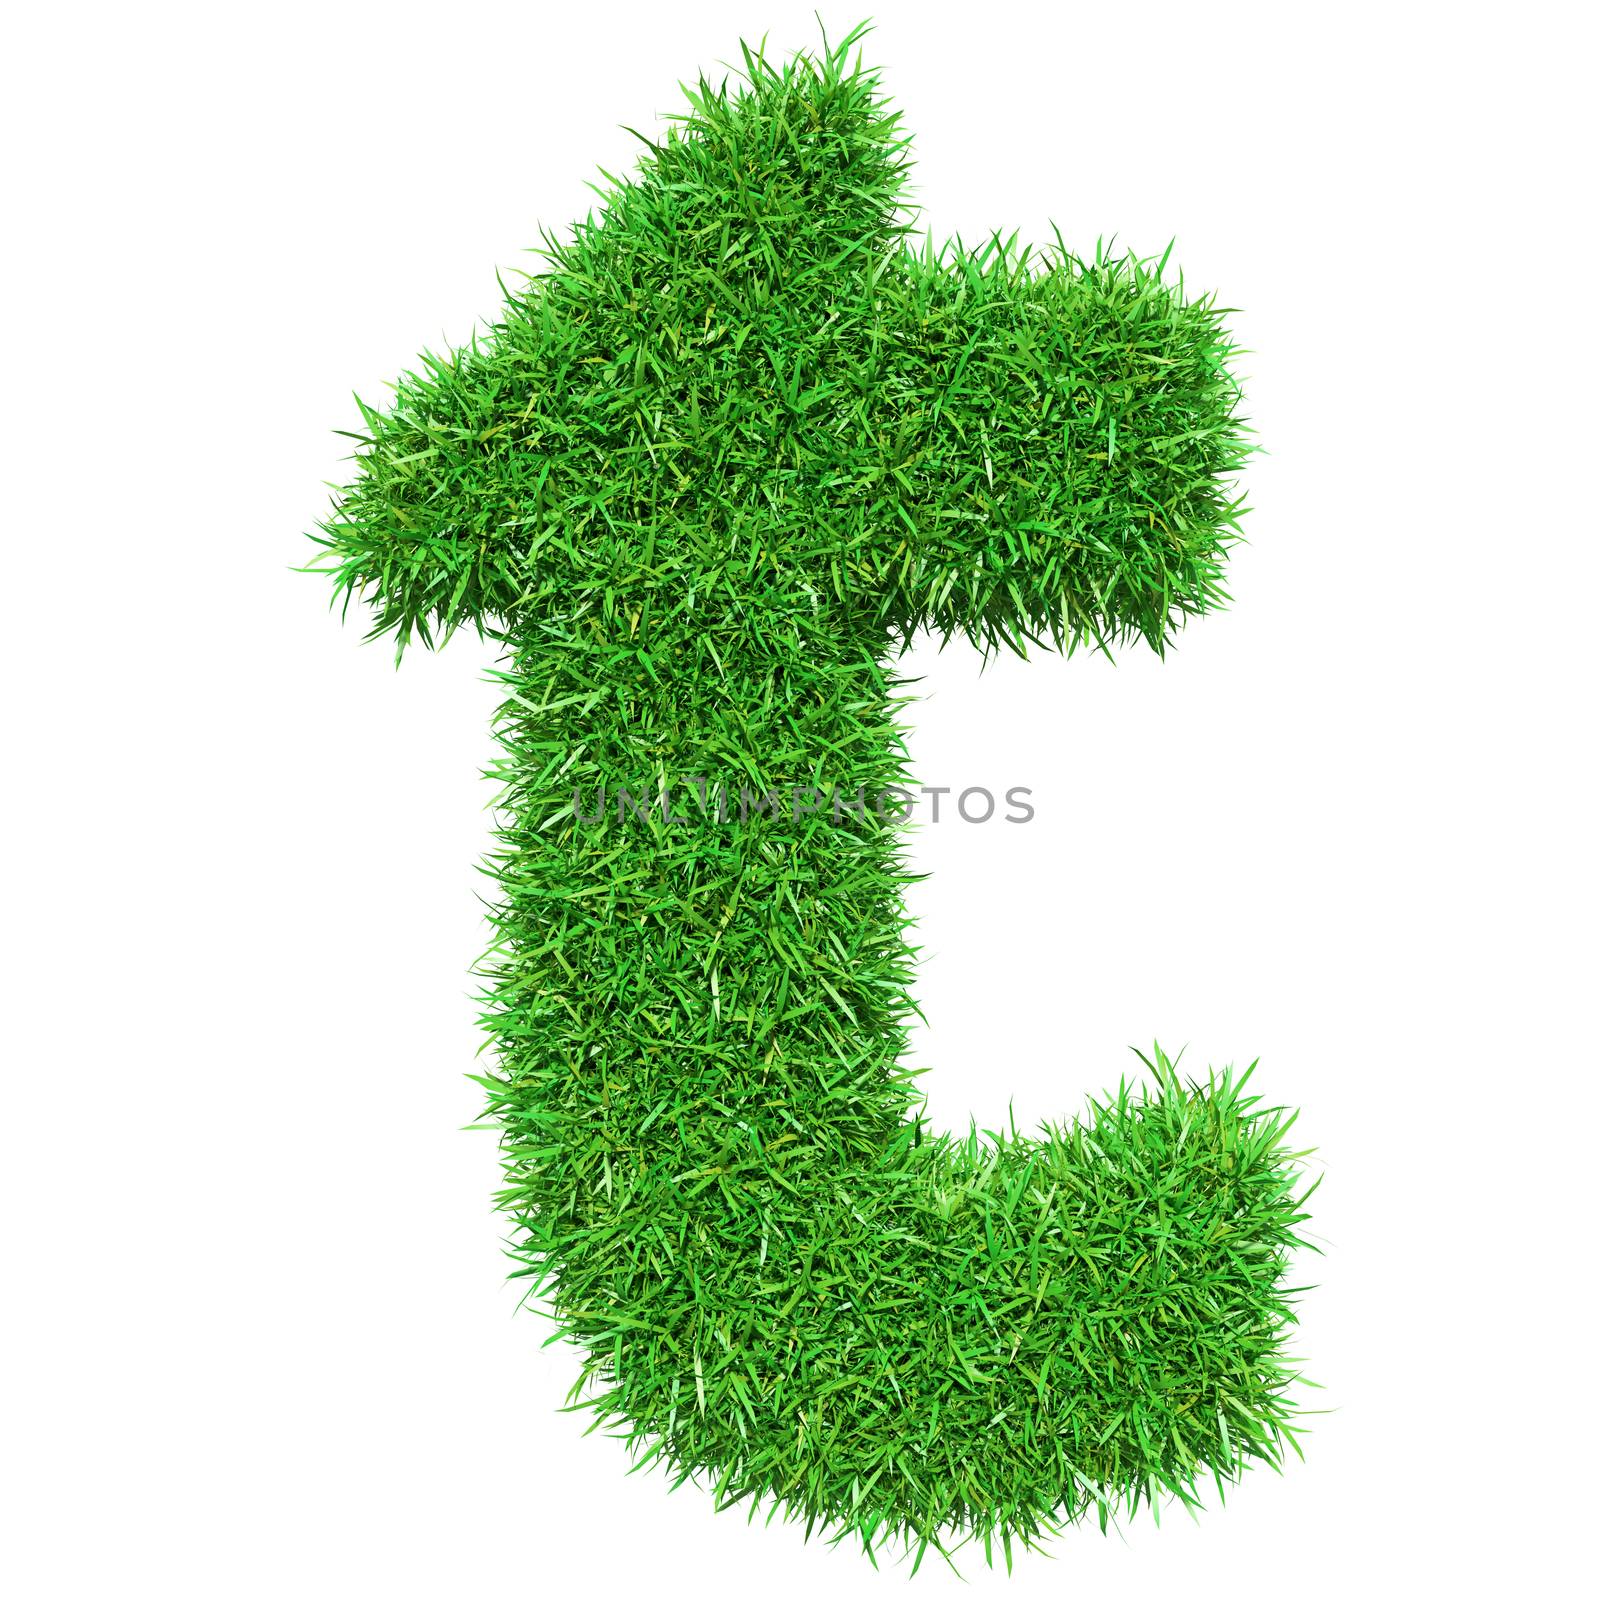 Green Grass Letter T by cherezoff